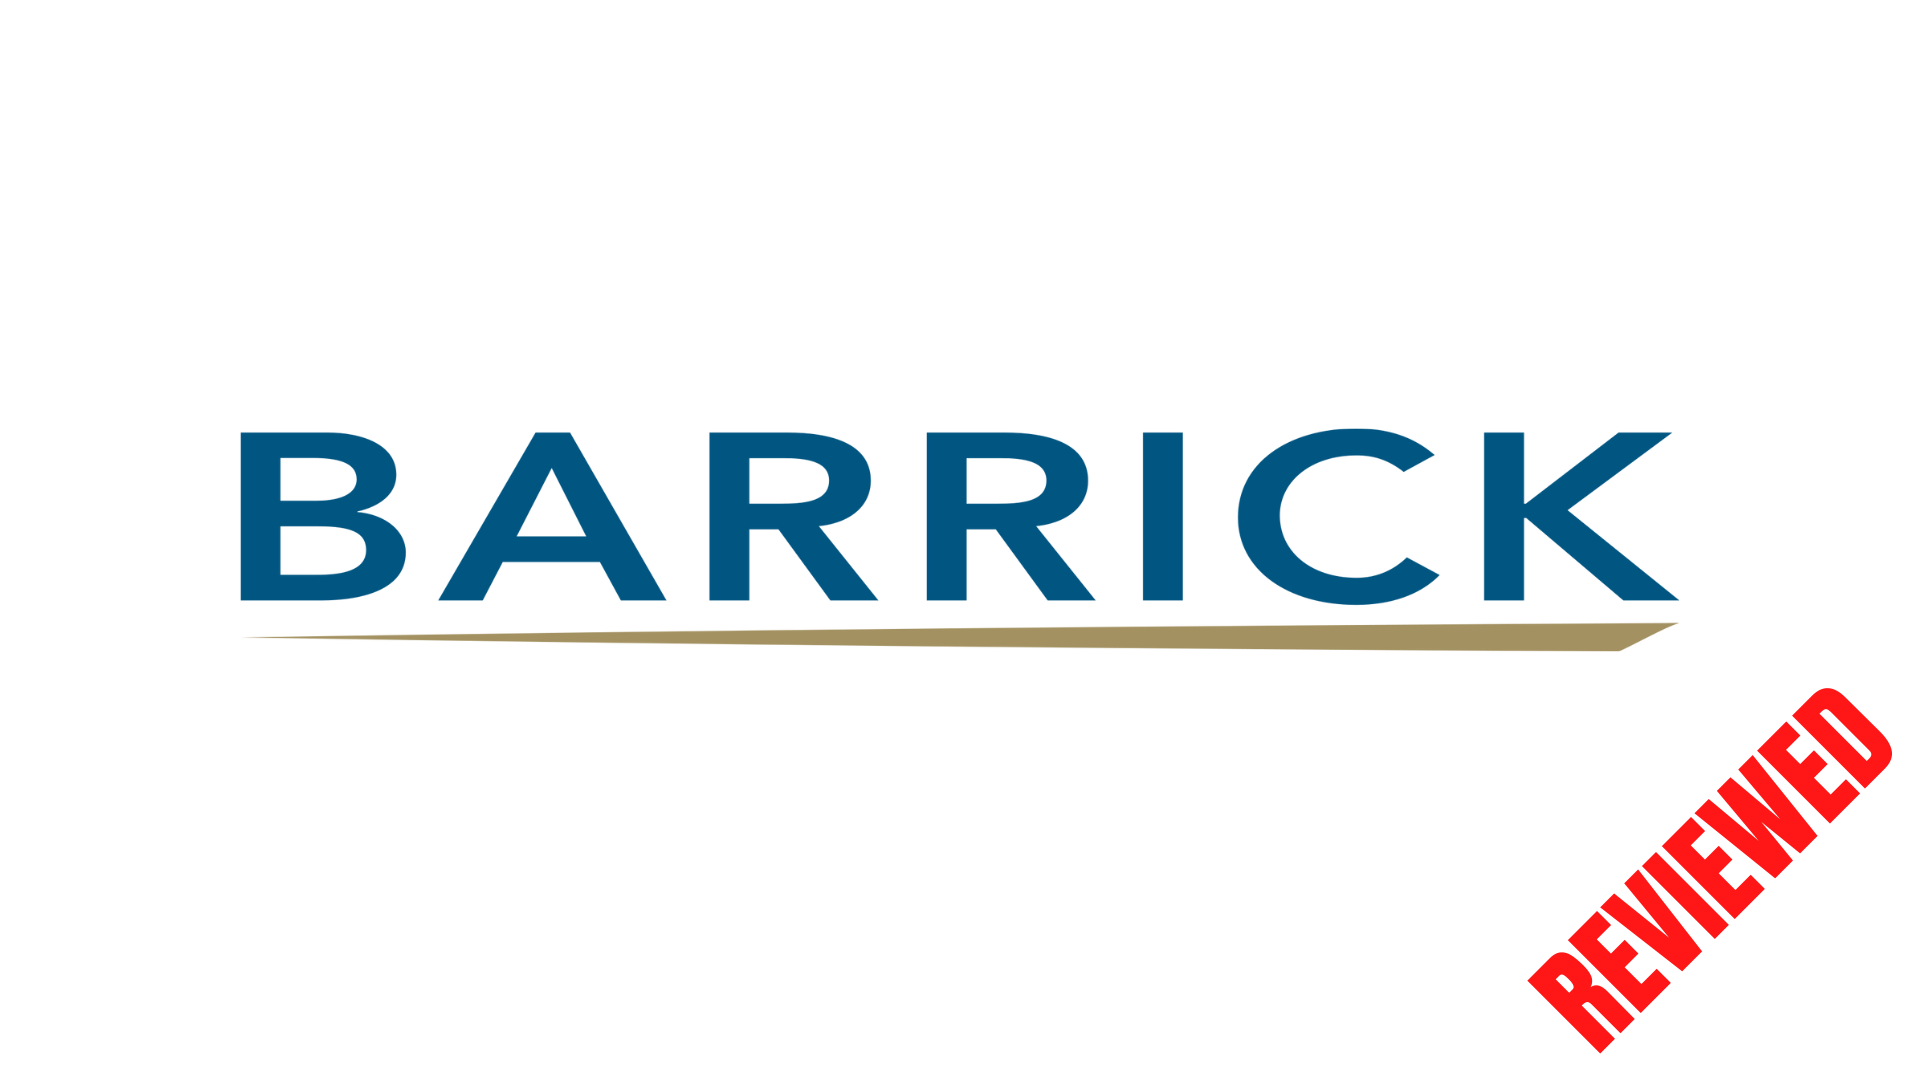 Is Barrick Gold A Scam?